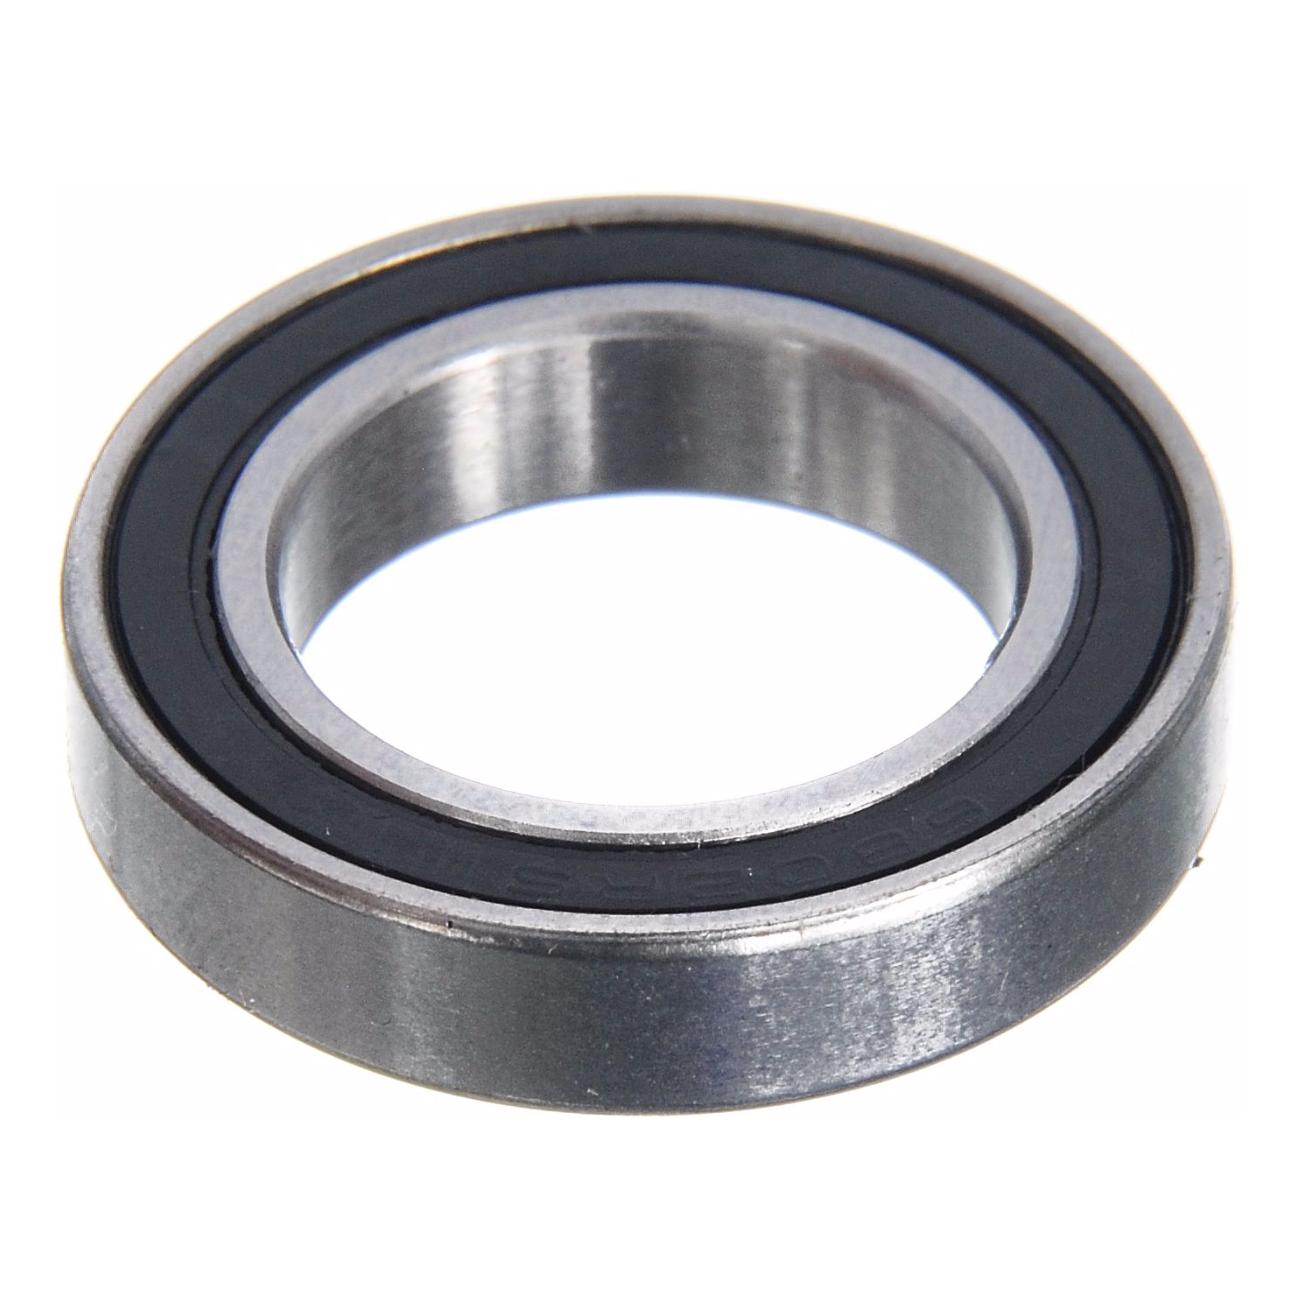 Brand-x Sealed Bearing (6901 2rs)  Silver